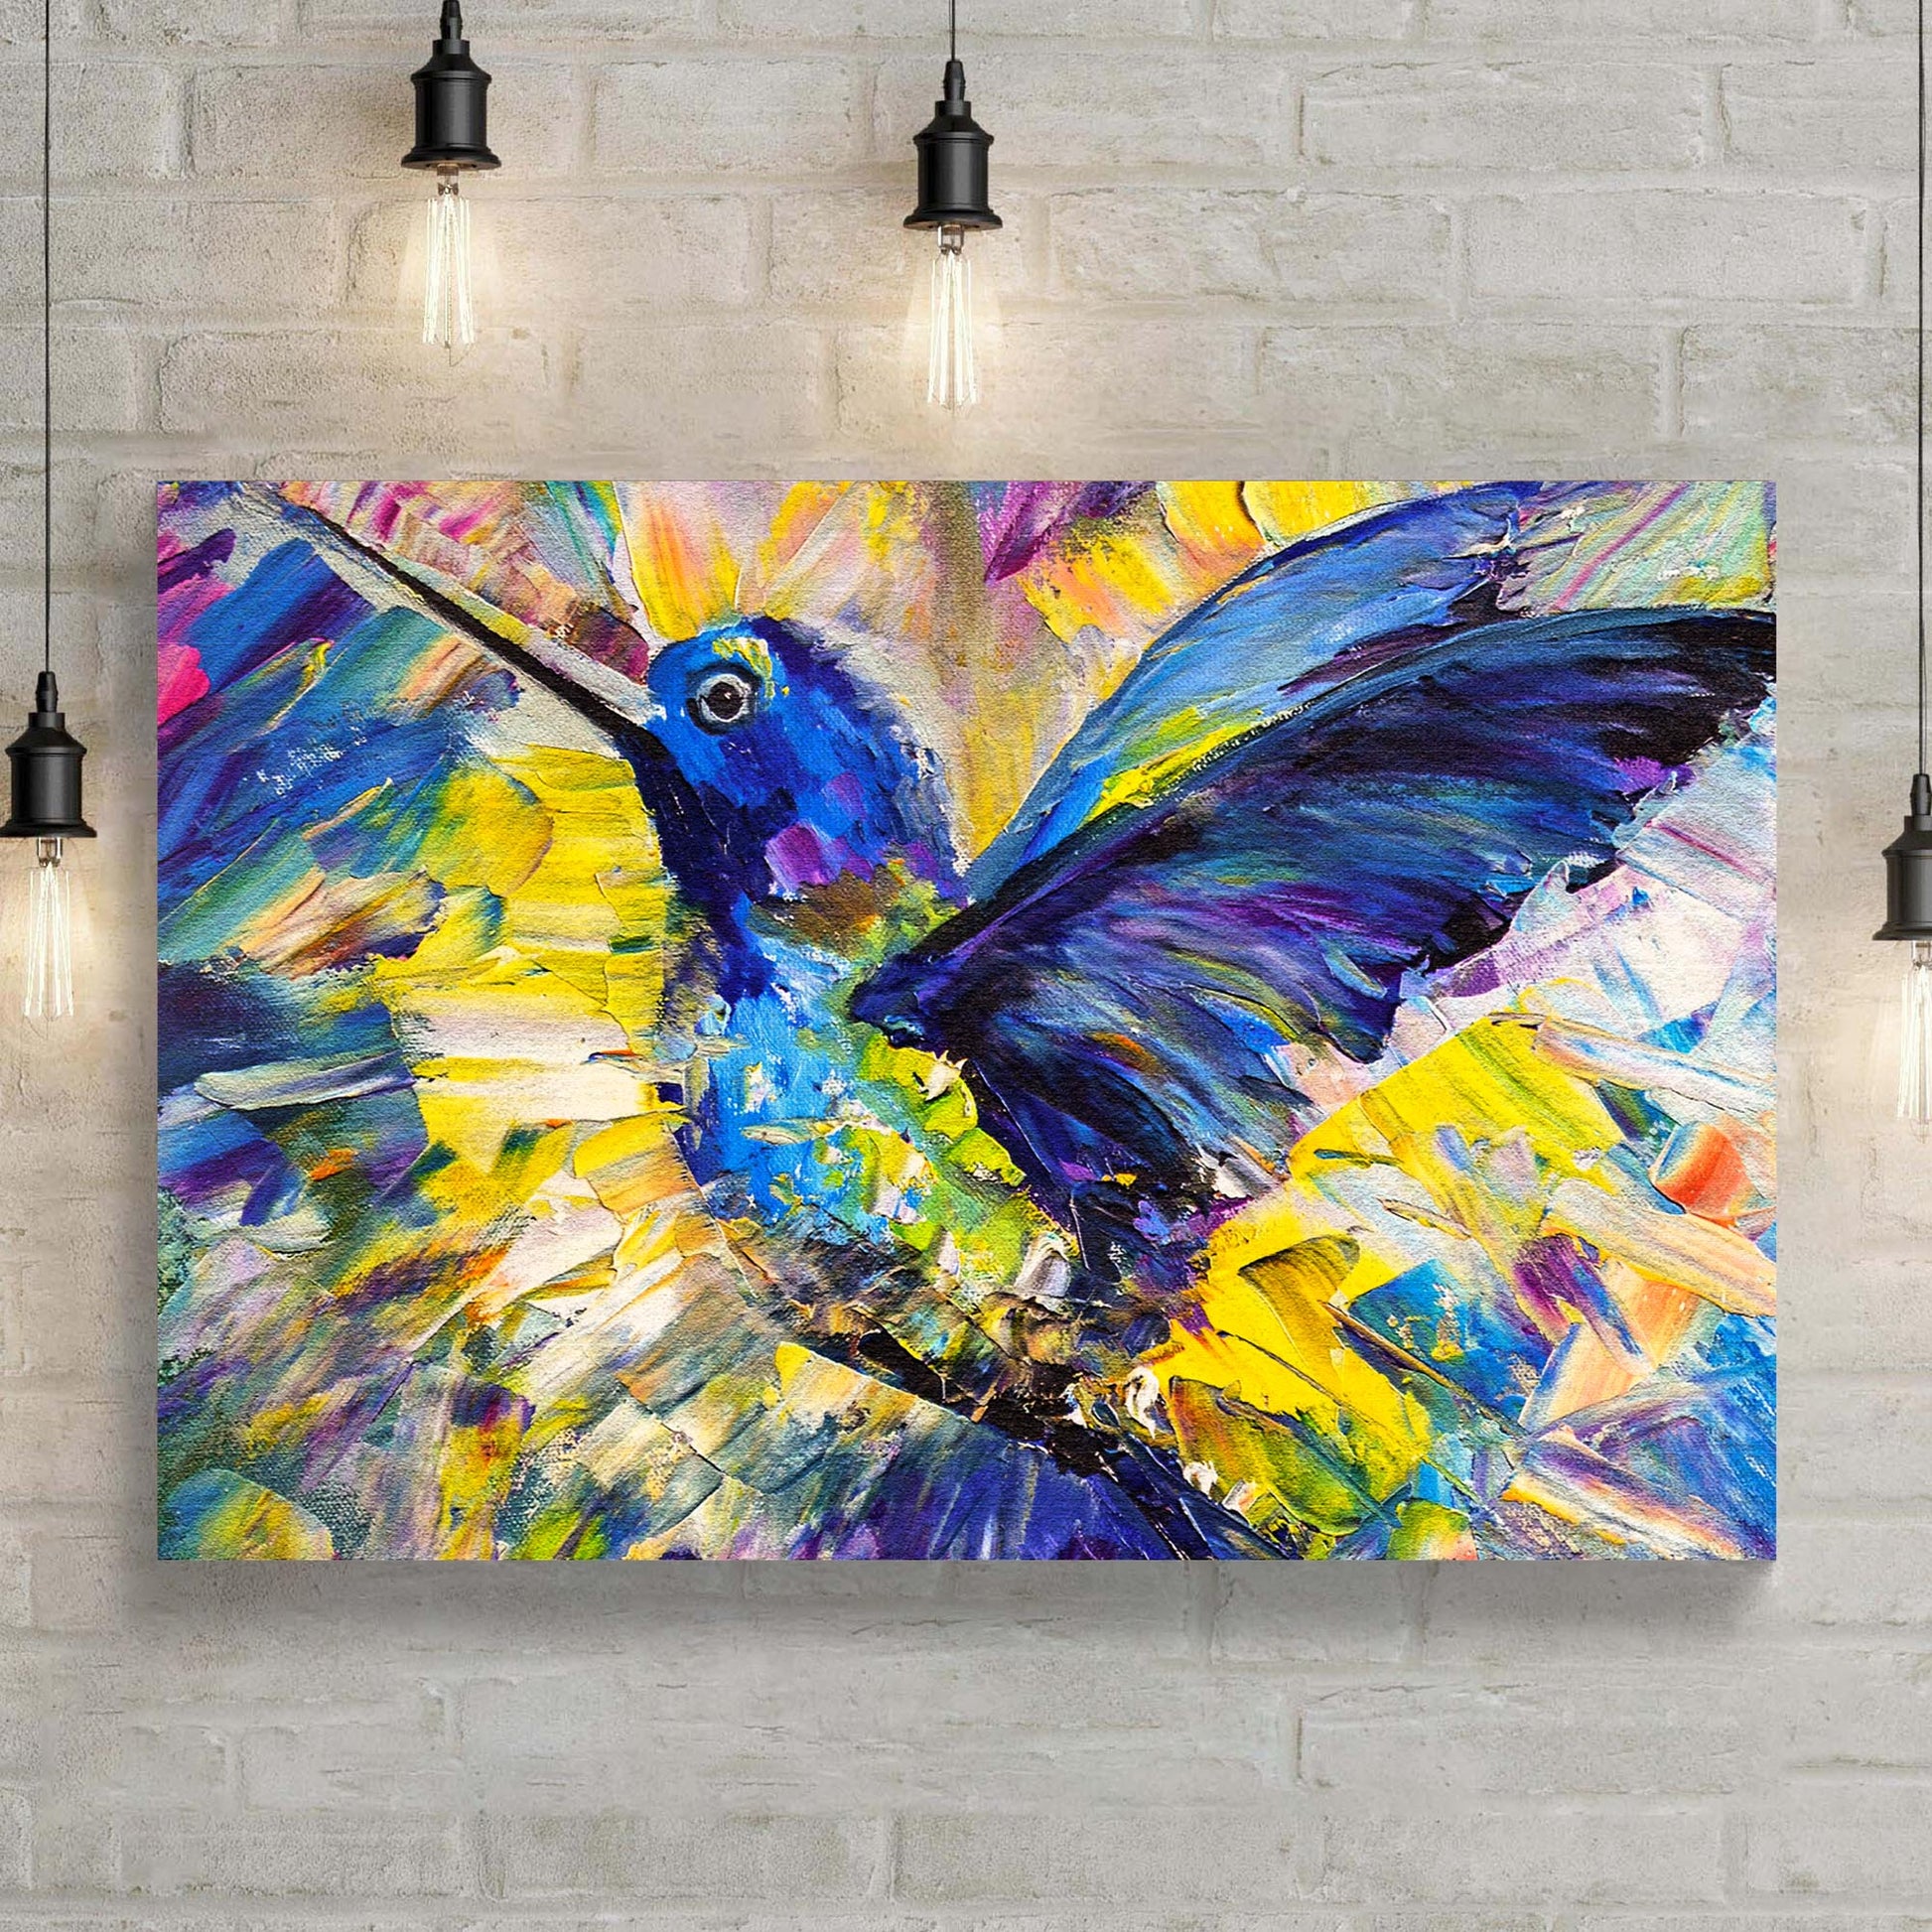 Hummingbird Abstract Canvas Wall Art Style 1 - Image by Tailored Canvases